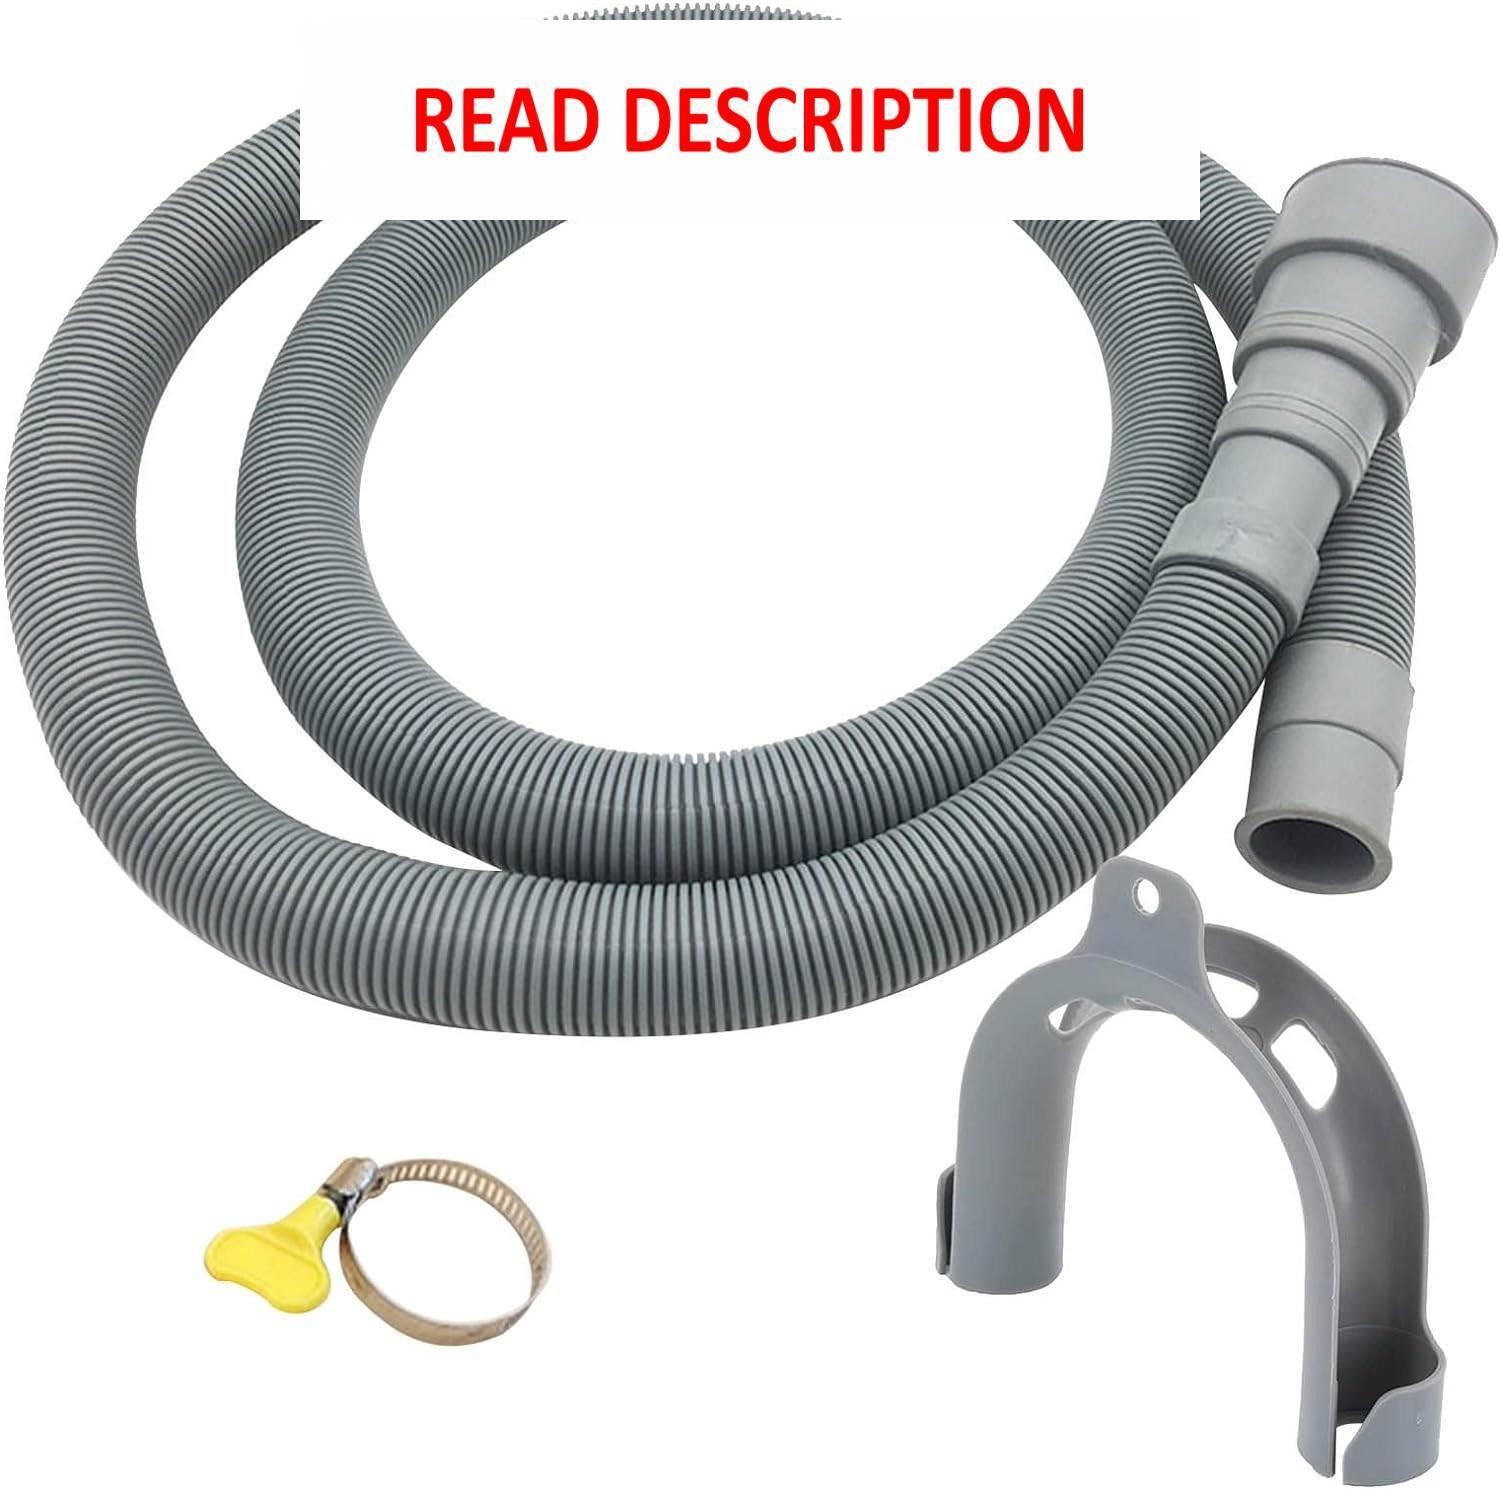 $12  Drain Hose Extension Kits with Holder (6 Ft)